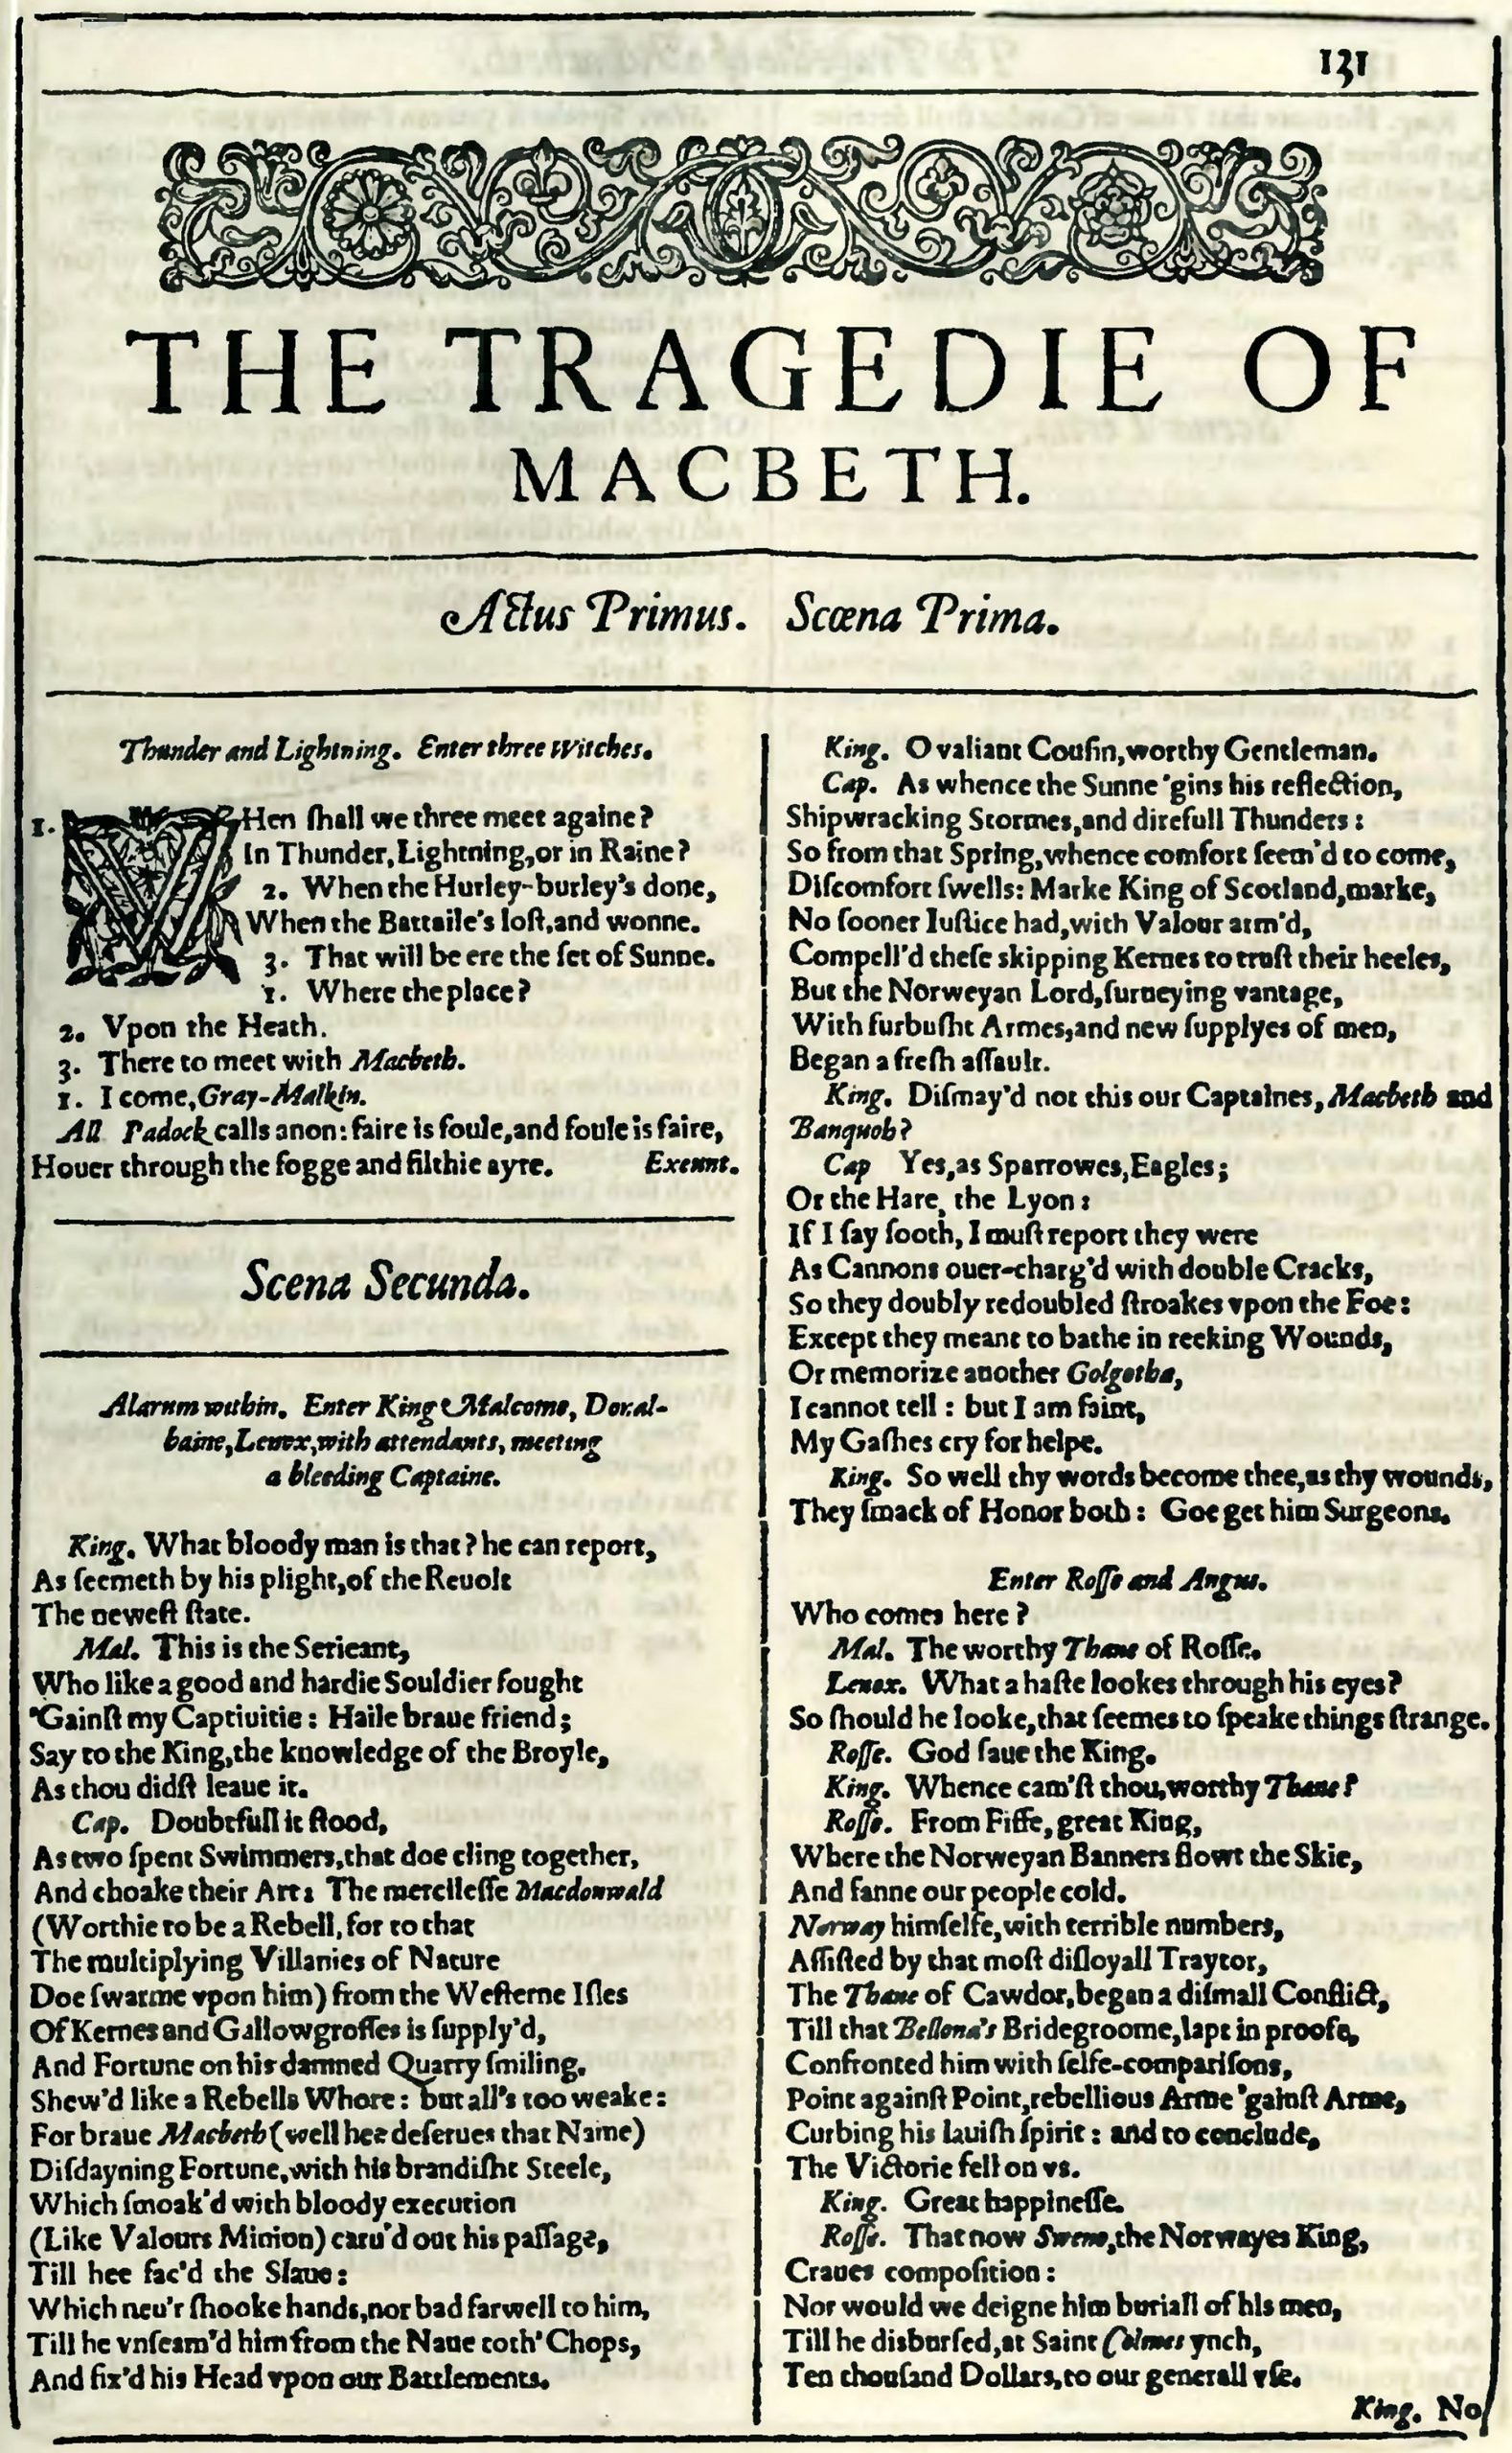 A scanned page from Shakespeare's First Folio, dated 1623, featuring the start of "The Tragedie of Macbeth." The page is ornately decorated with intricate borders at the top and contains stylized, early modern English typeface. The title, "The Tragedie of Macbeth," is prominently displayed at the top center. Below, the play commences with "Actus Primus. Scena Prima," followed by a description setting the scene with "Thunder and Lightning. Enter three Witches." The text includes various character lines and stage directions, providing dialogue and context for the early moments of the play. The overall aesthetic is reminiscent of Renaissance literature, characterized by its detailed typography and classic layout.